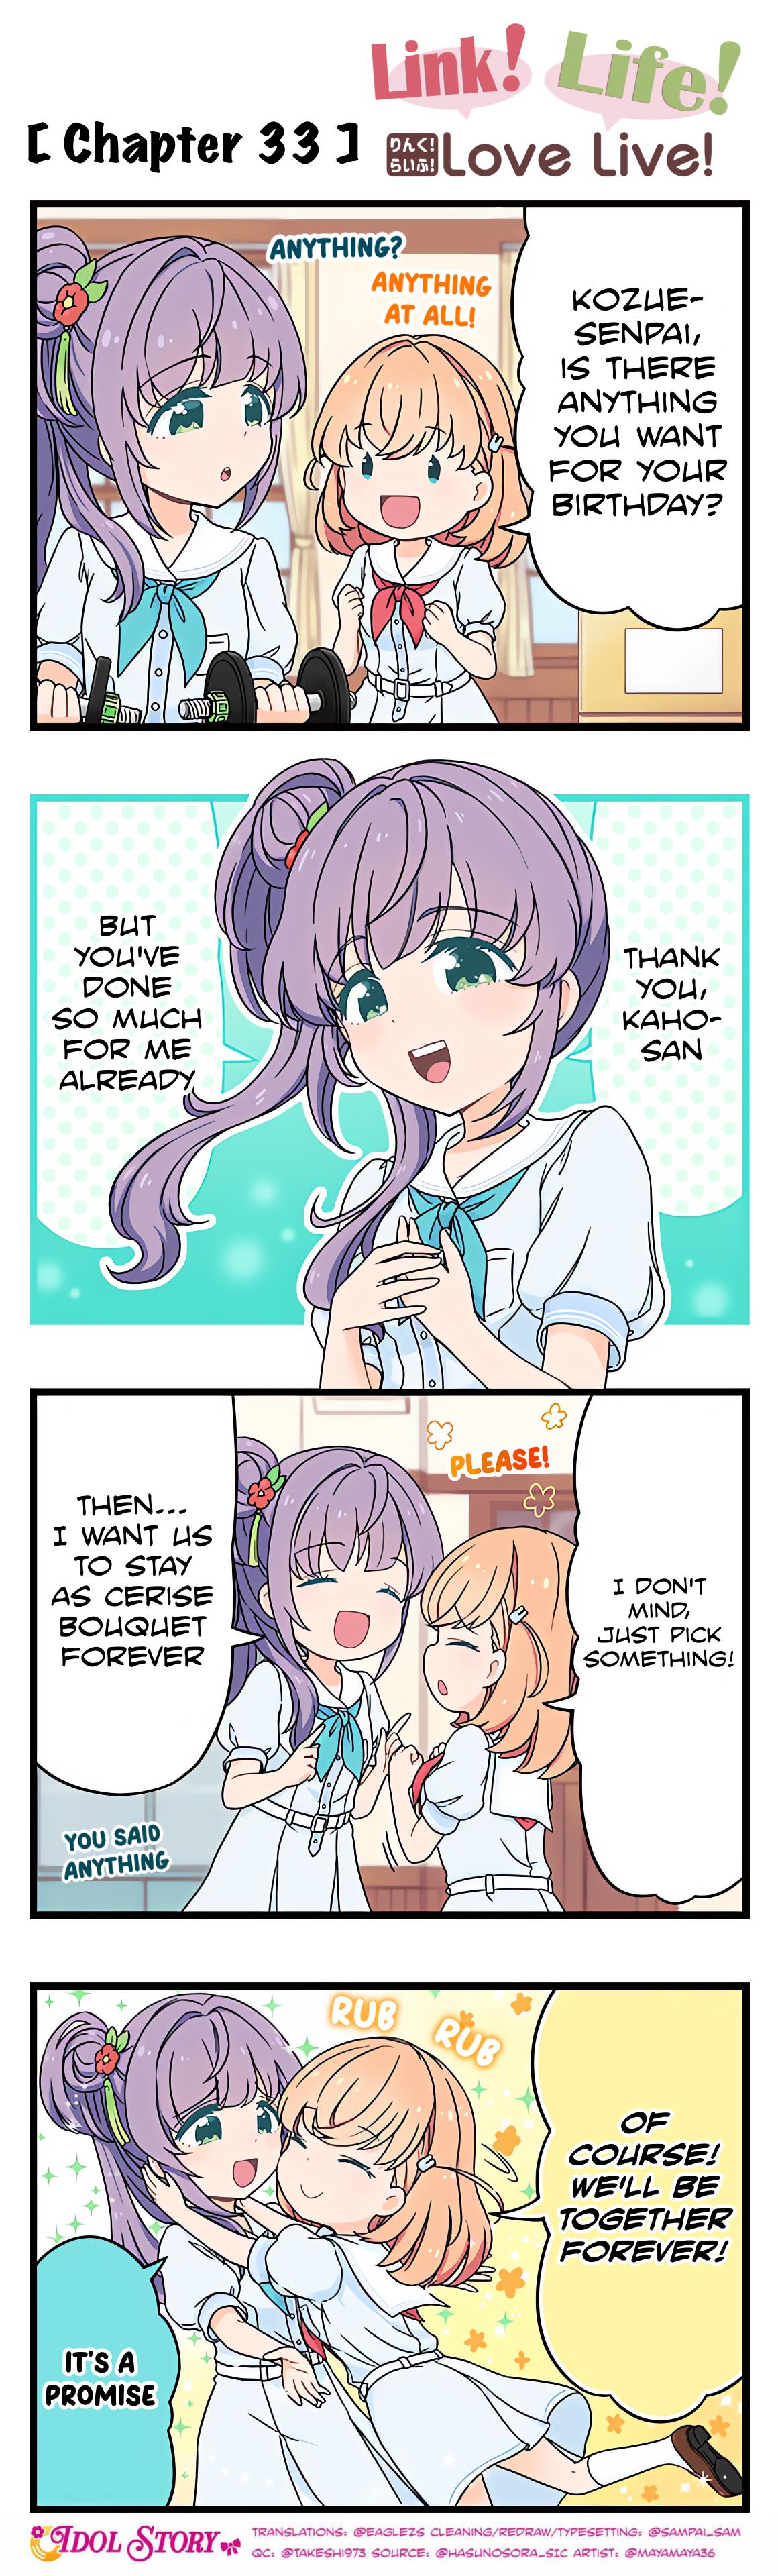 Link! Life! Love Live! Chapter 33 - Picture 1